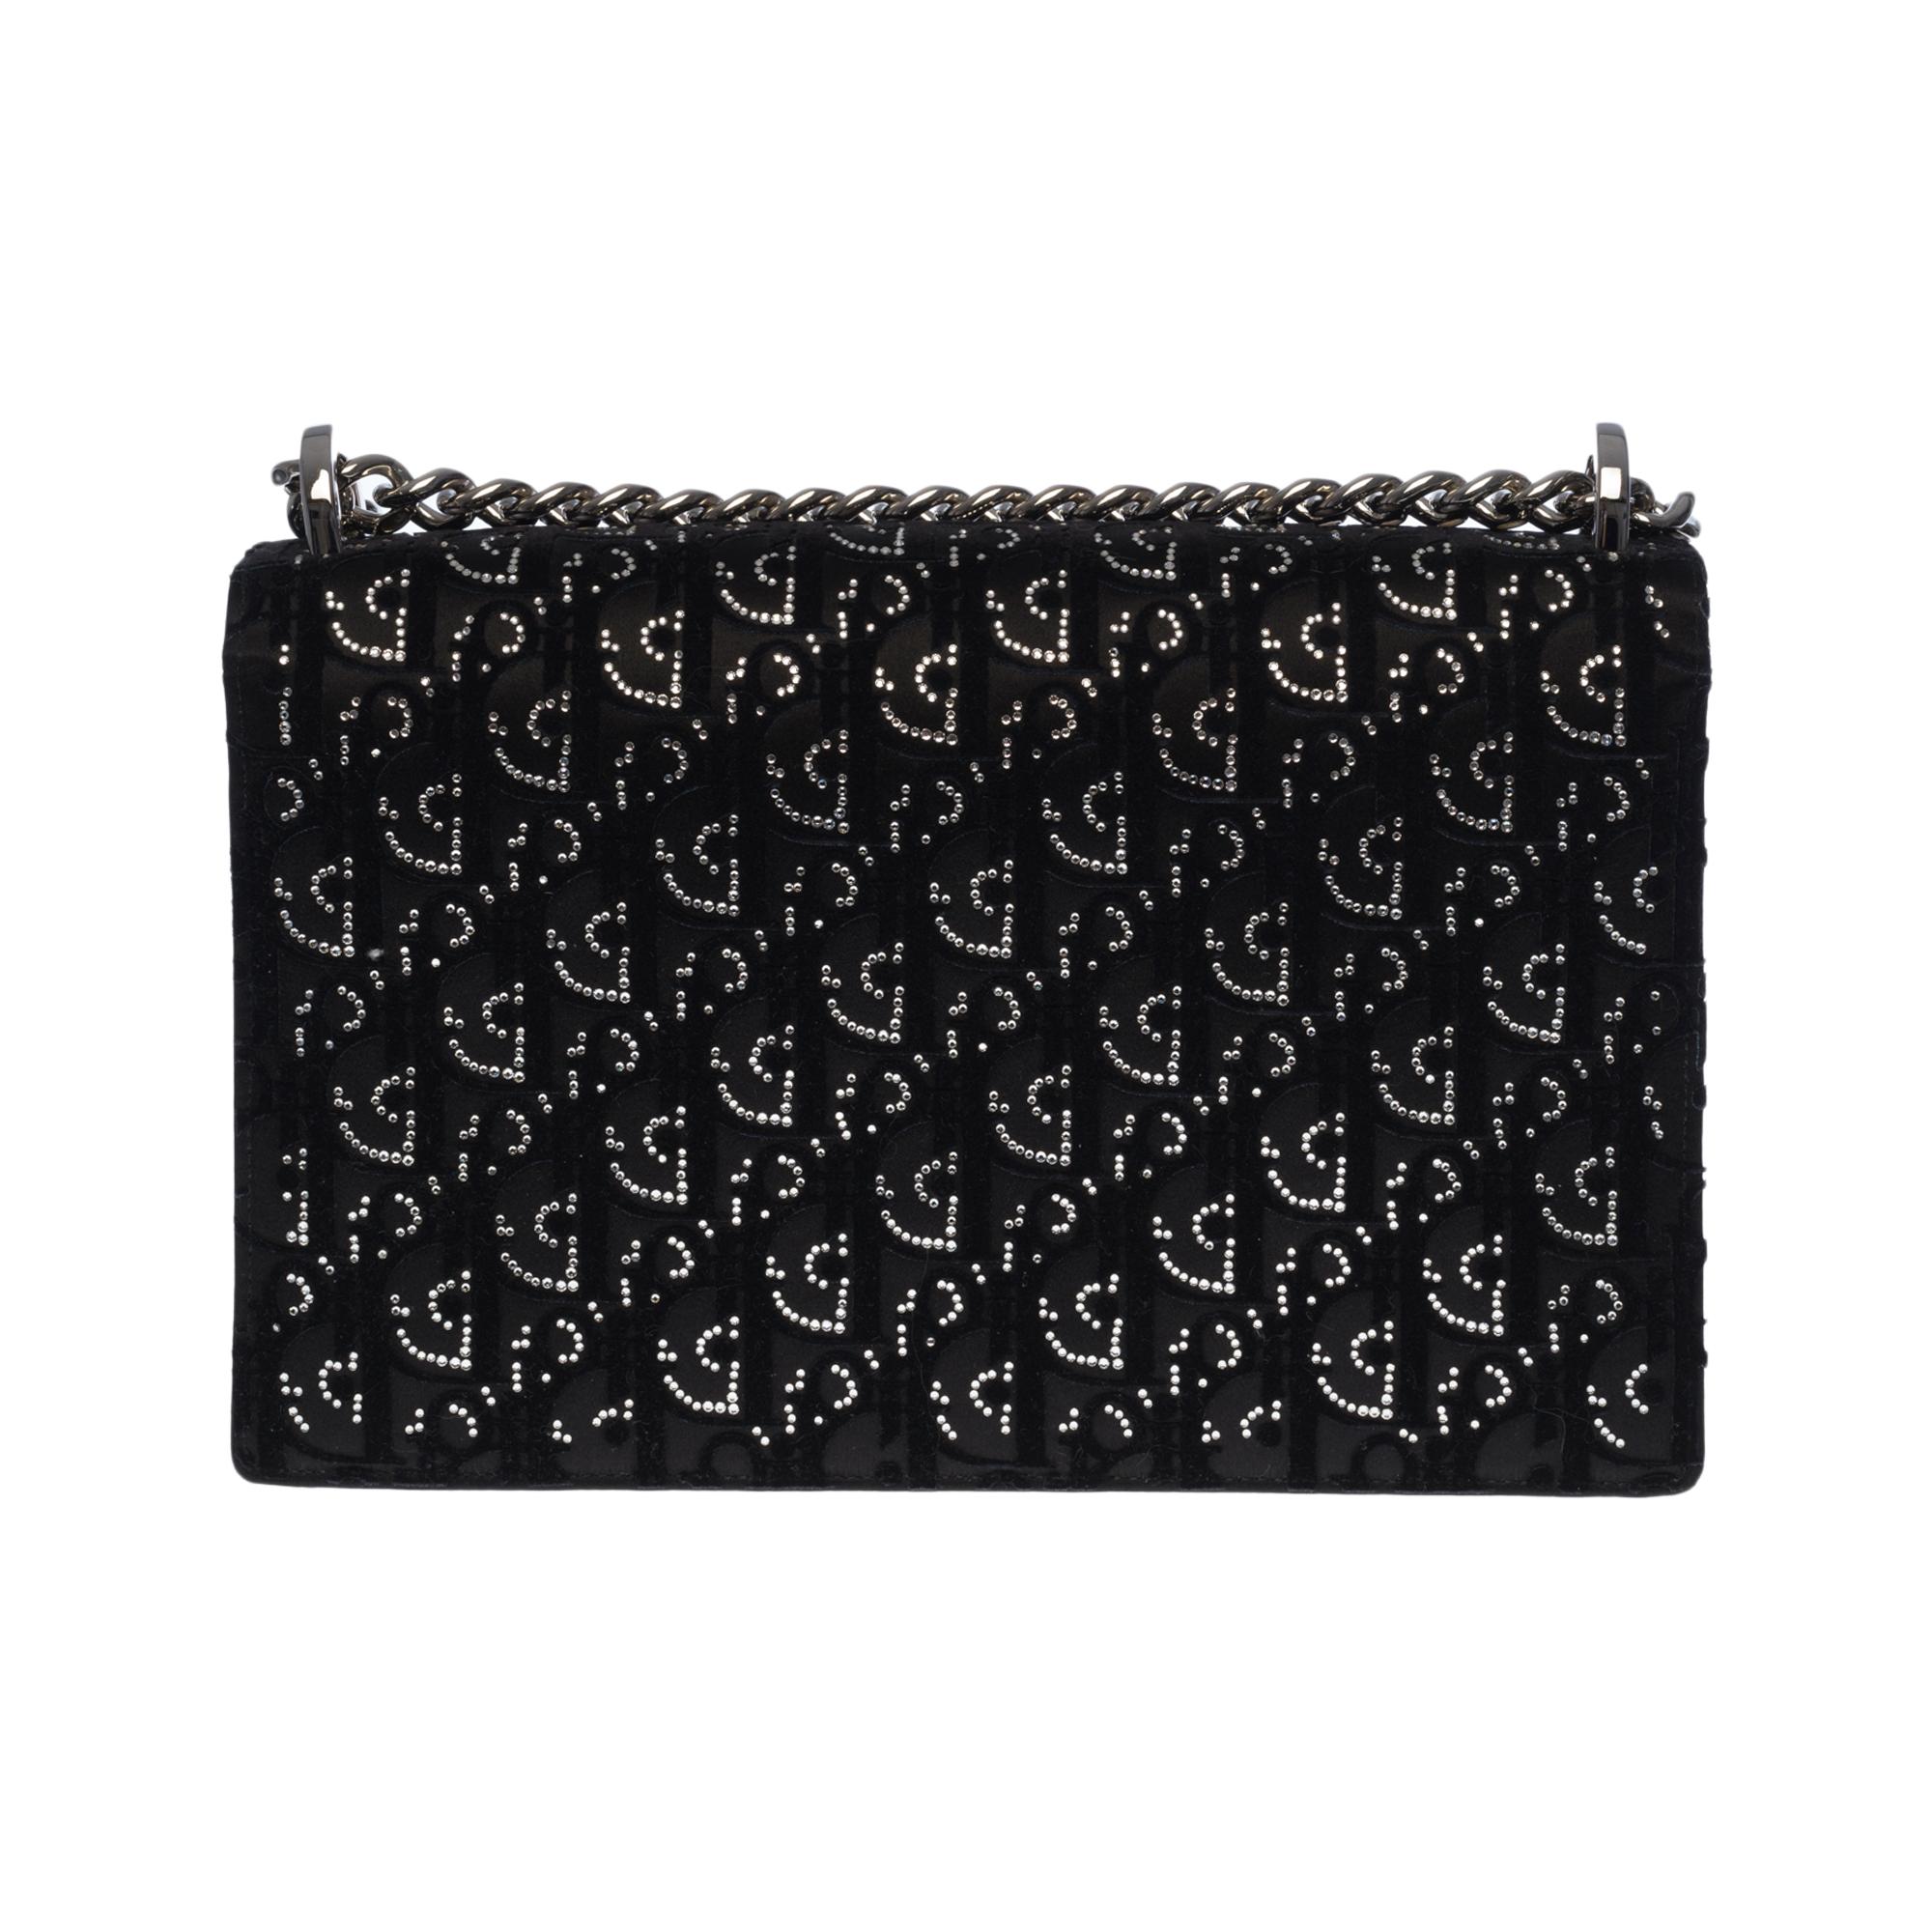 LIMITED EDITION DIORAMA BAG

Splendid Christian Dior Diorama limited edition crossbody bag in black velvet leather printed with Dior monogram in silk and crystals, silver metal trim, a chain handle transformable into silver metal allowing a hand or